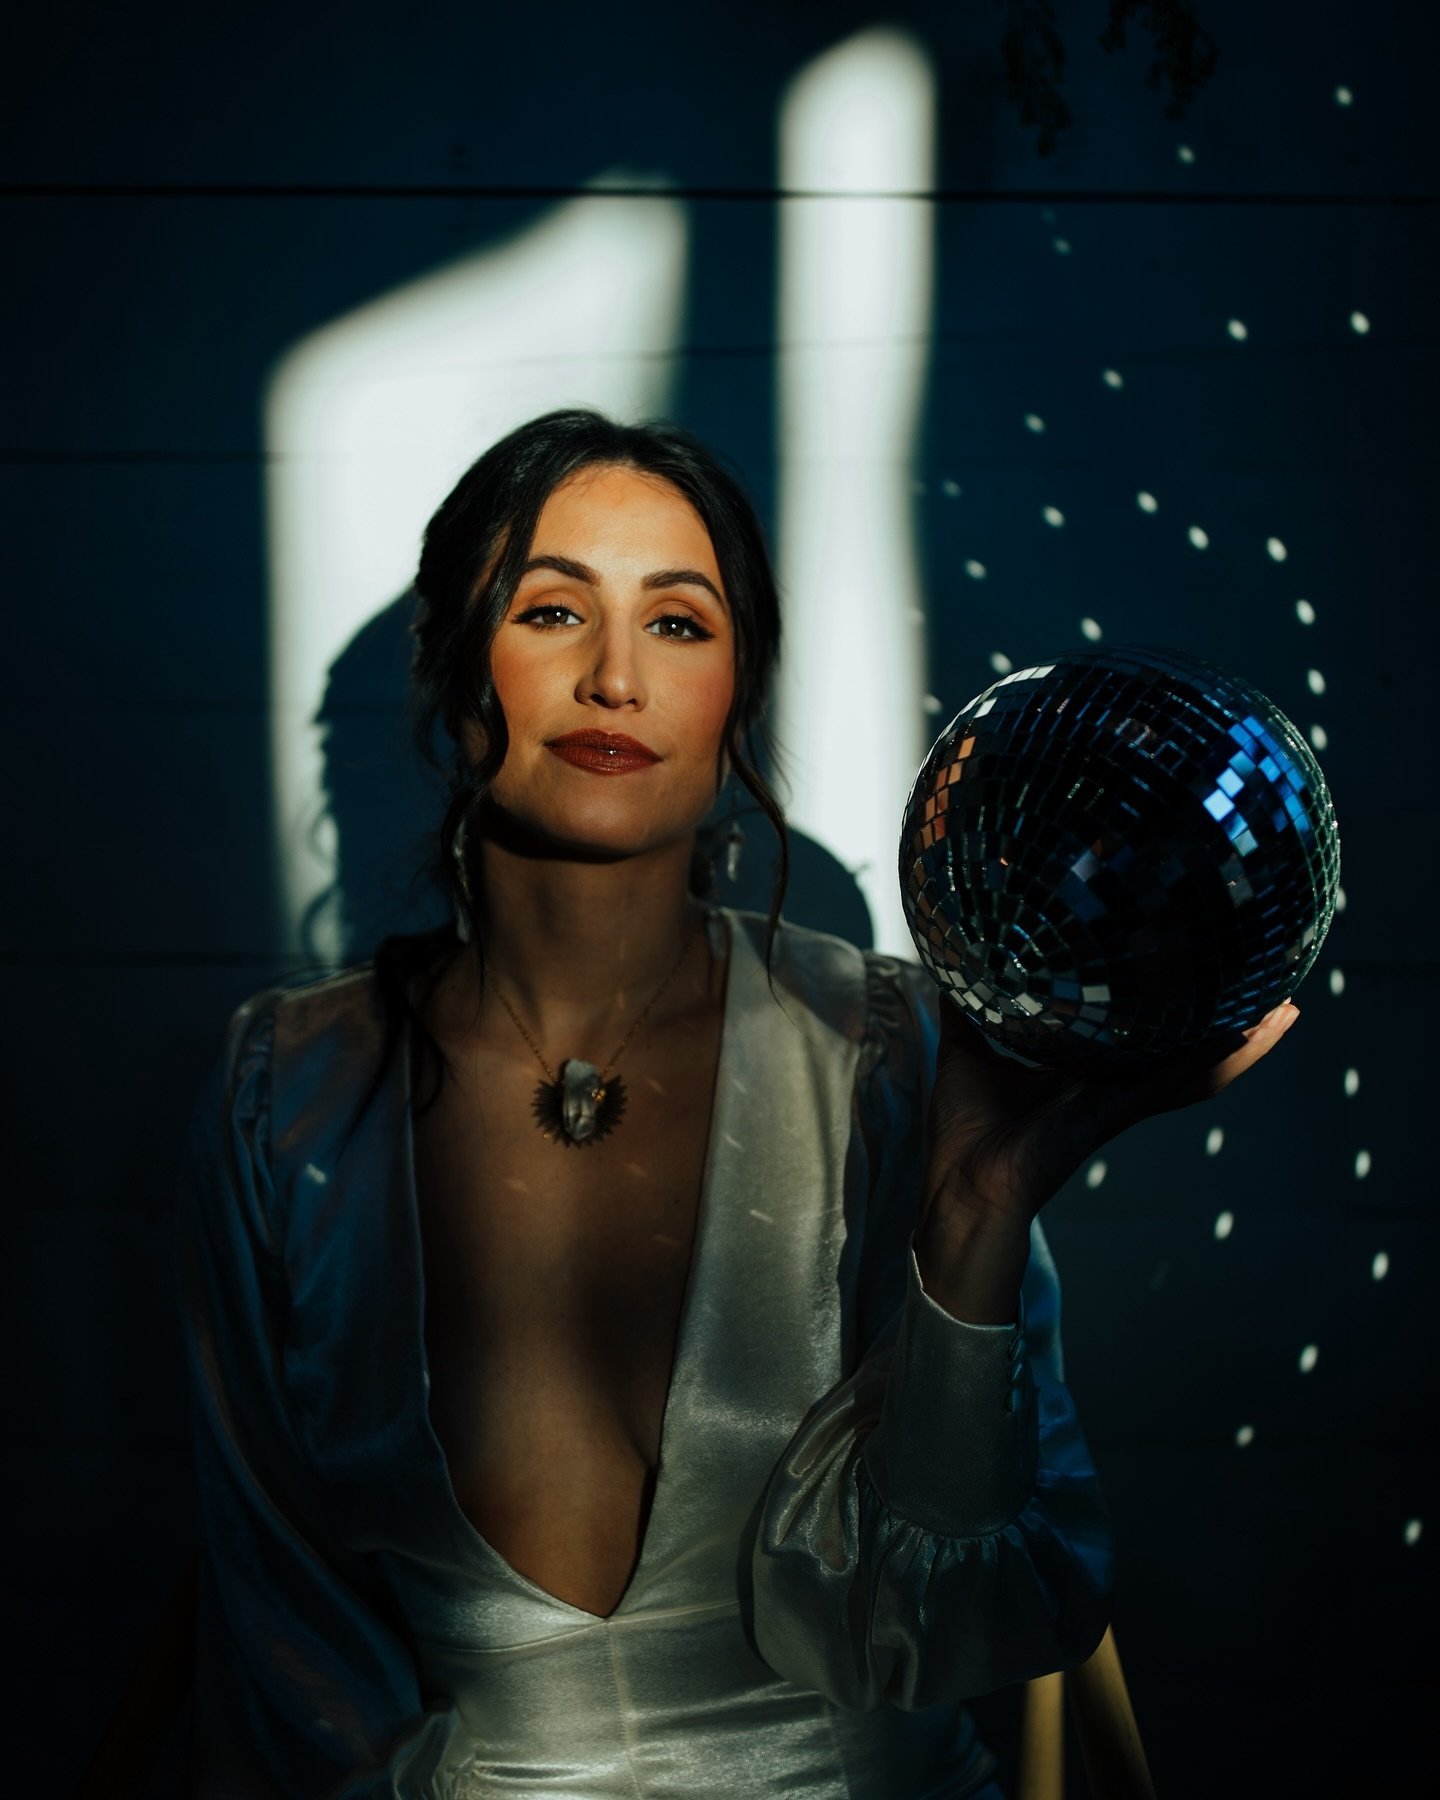 Disco ball + hard light = perfection 

This was from 4 years ago. But it deserves a spot in your feed. 

Model | @vatrfp 
.
.
.
#tessfarnsworthphotography #editorialphotography #flashback